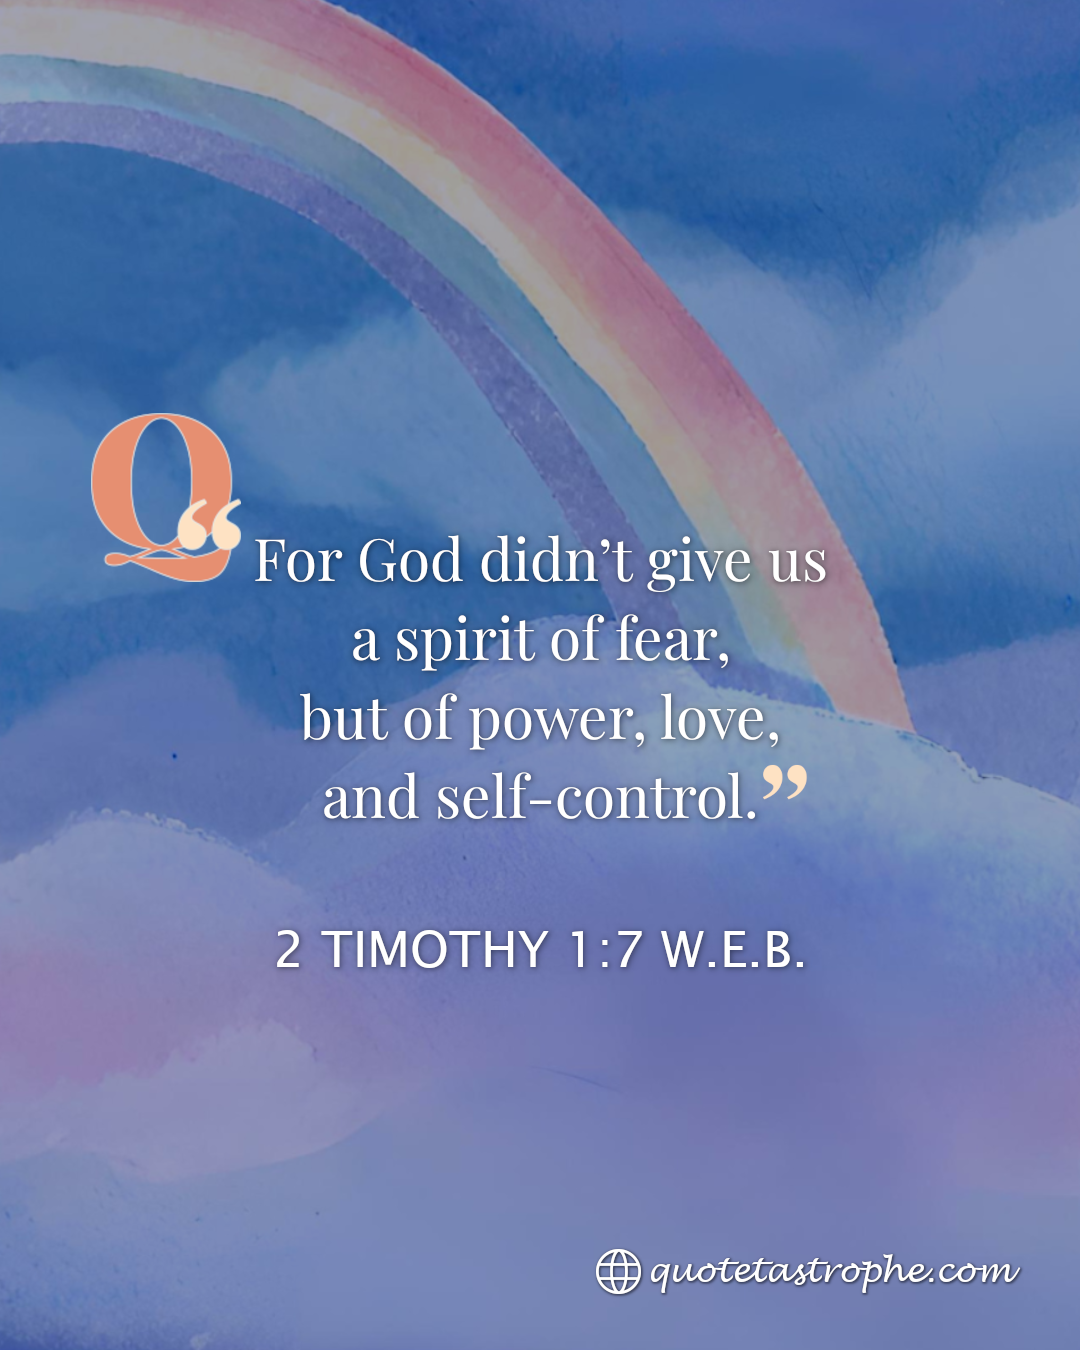 2 Timothy 1:7 Bible Quotes Images For You